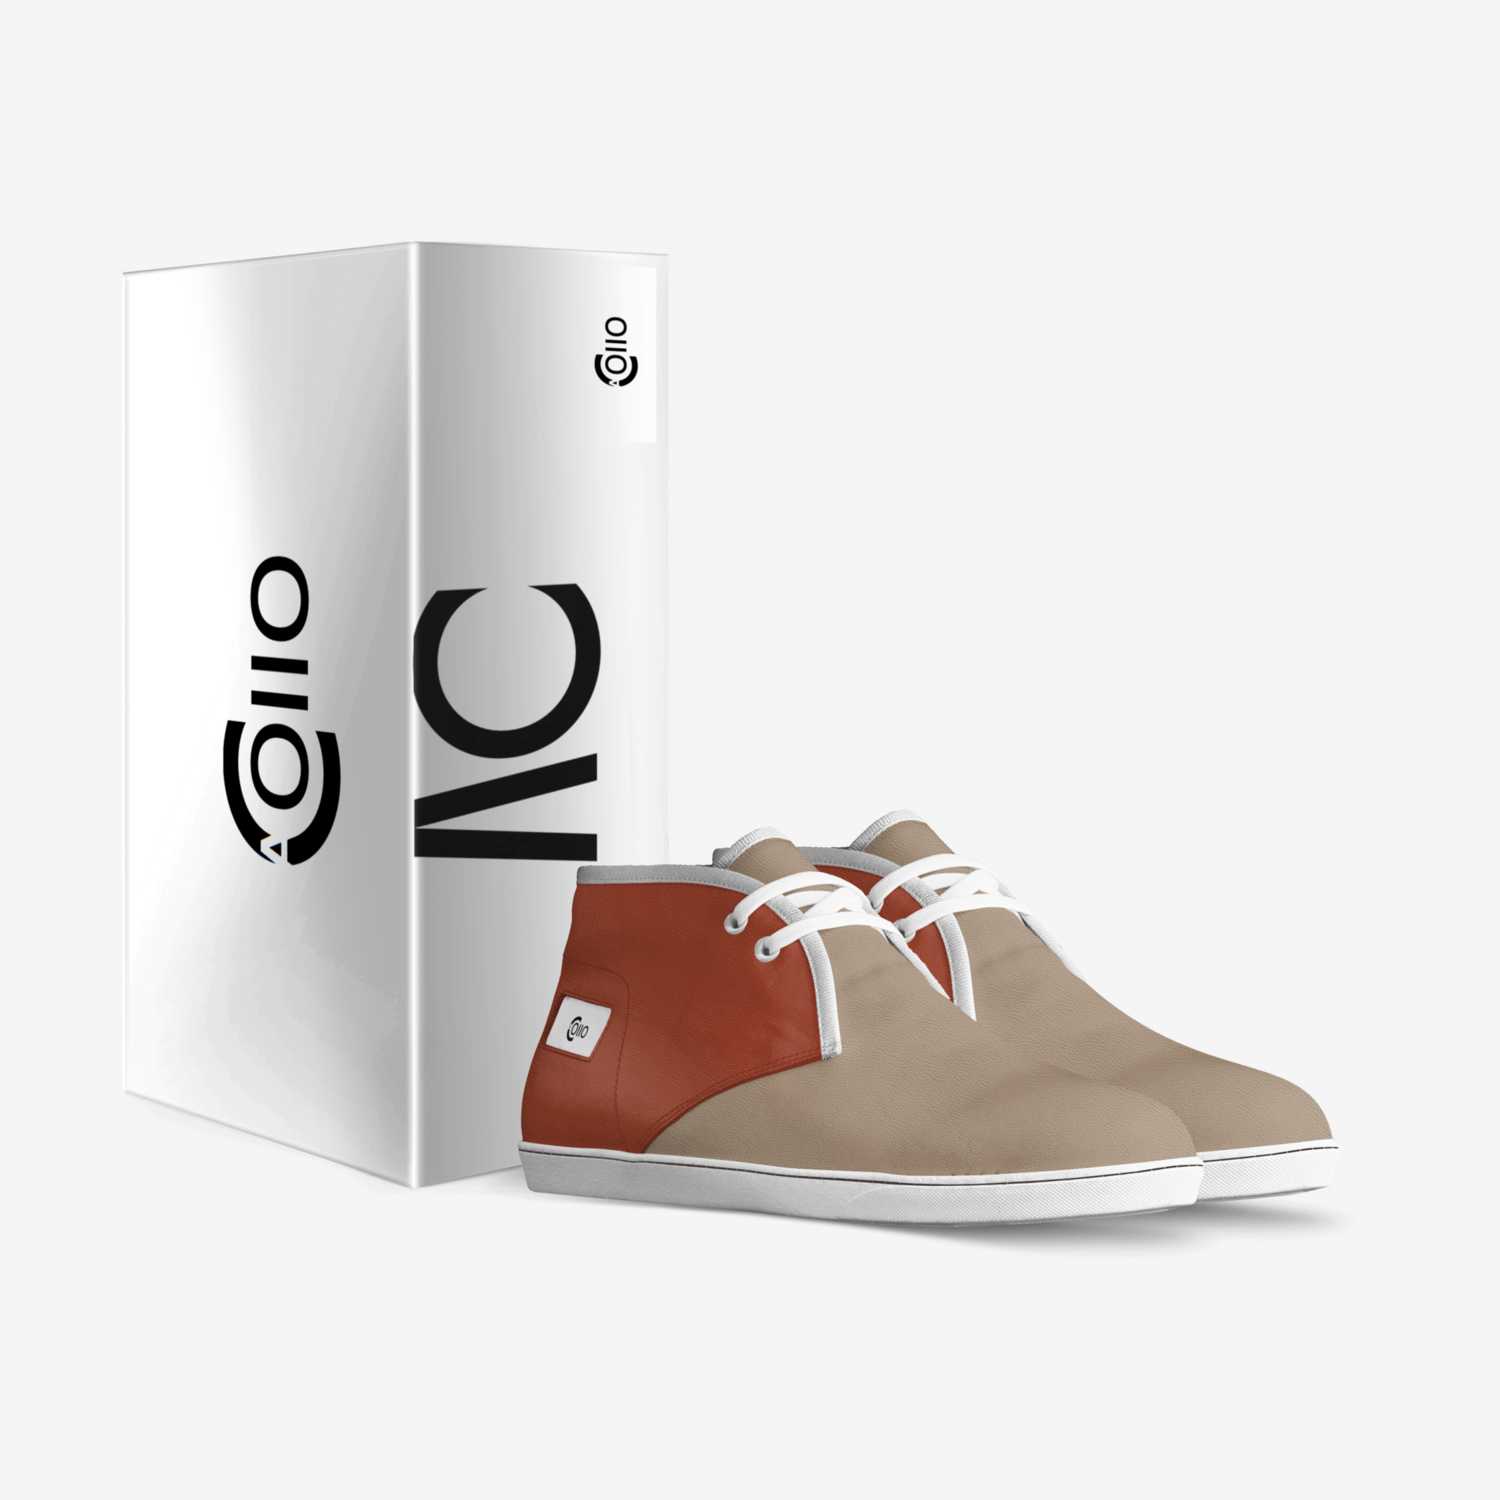 OIIO custom made in Italy shoes by Km Brand | Box view